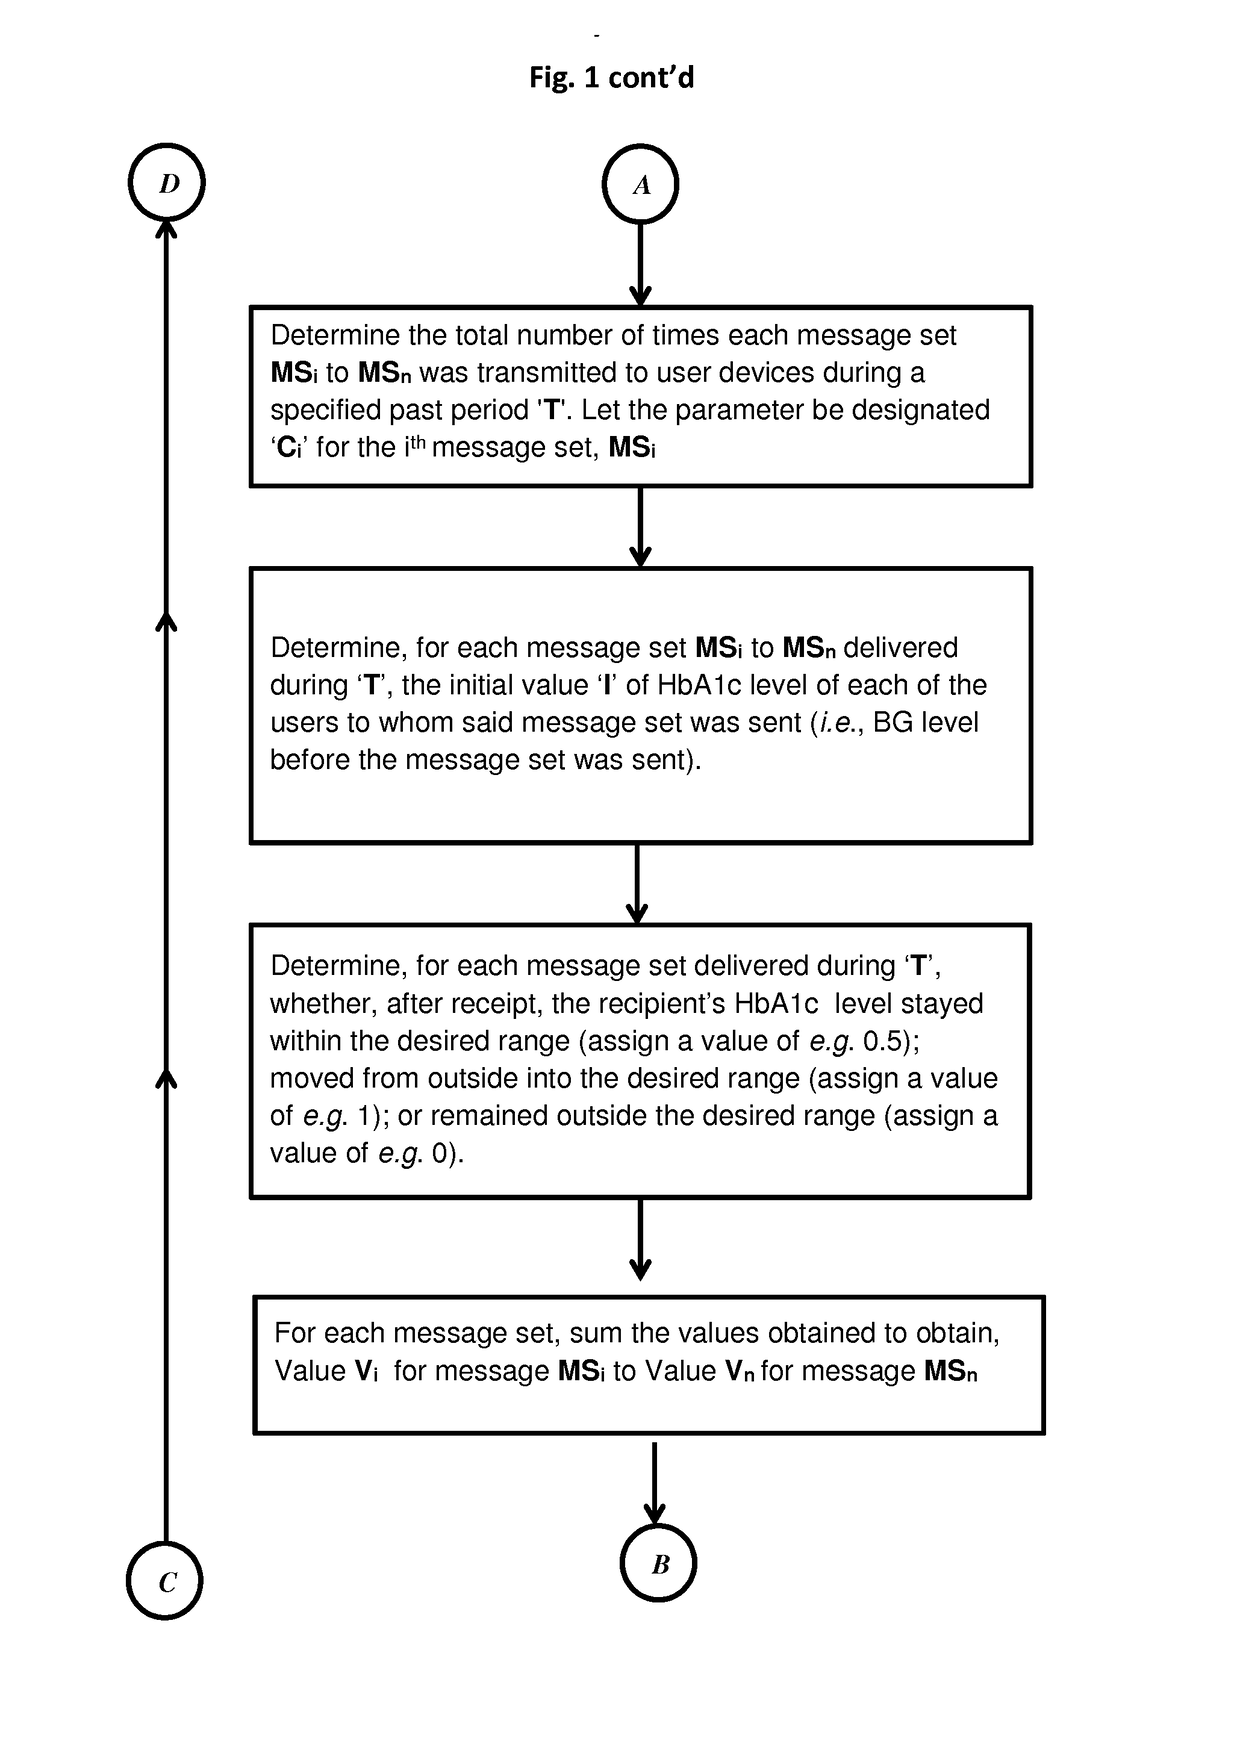 Optimizing Messages Sent to Diabetic Patients in an Interactive System Based on Estimated HbA1c Levels